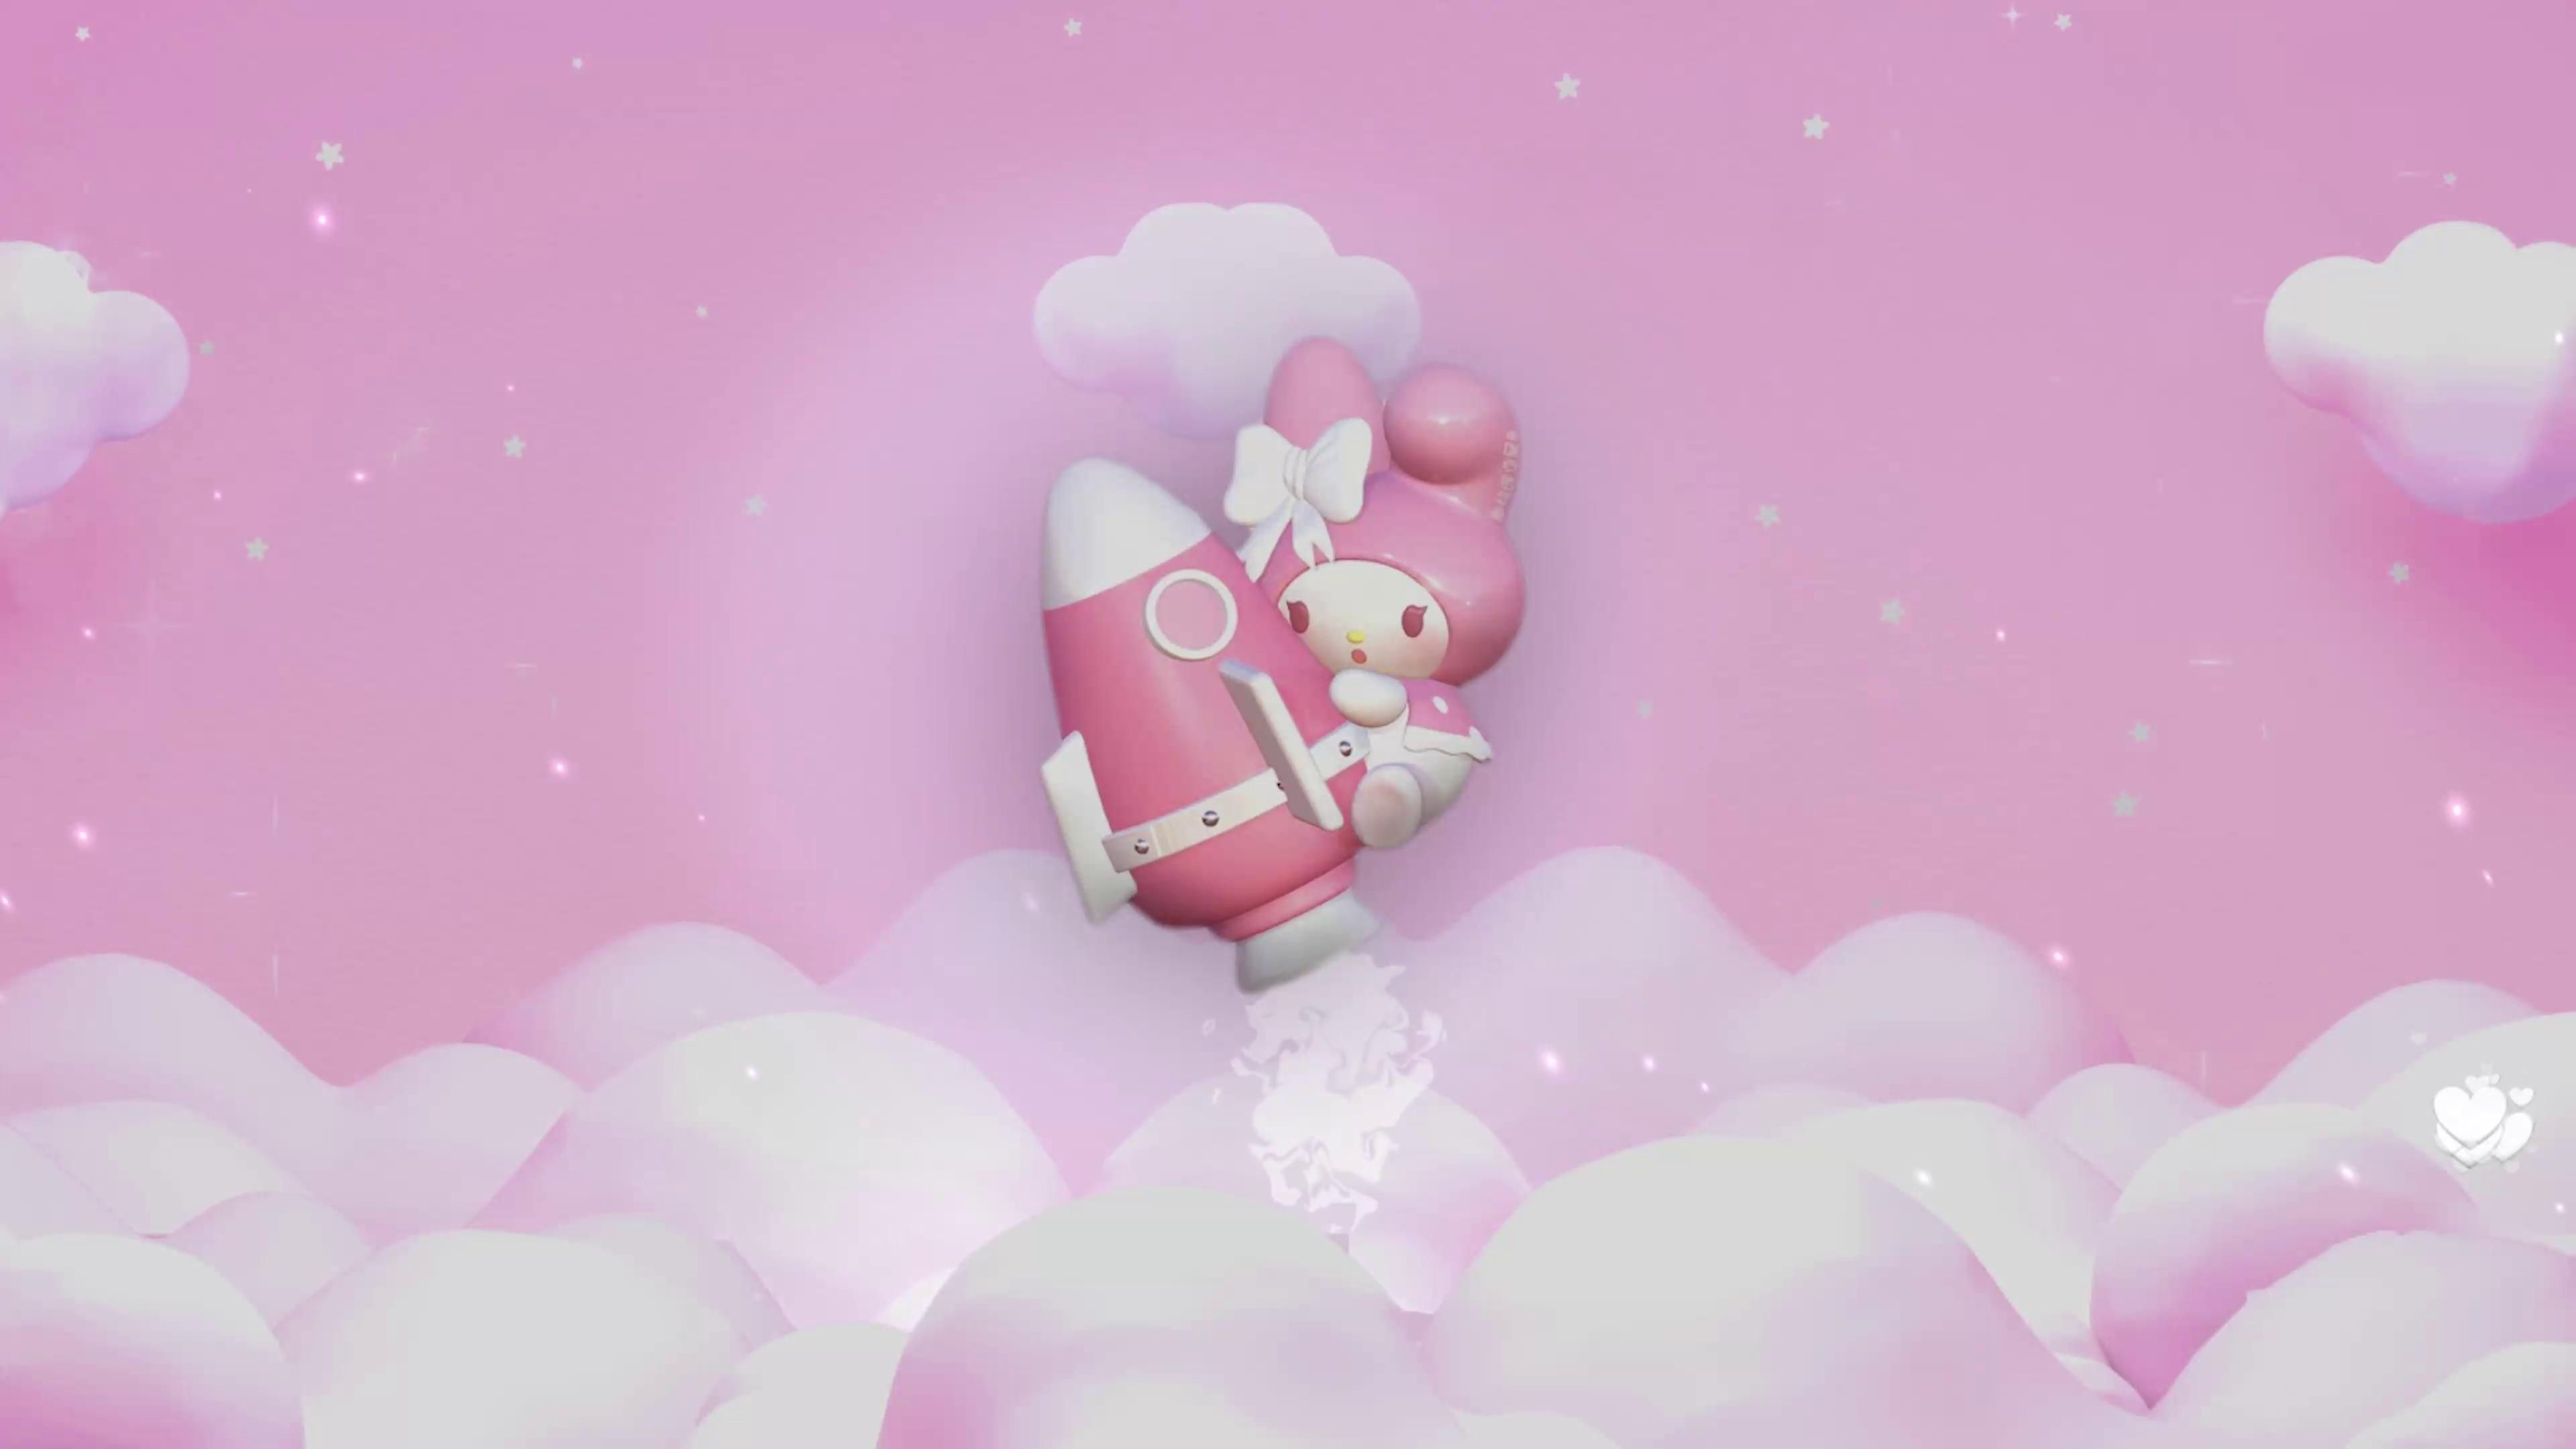 A pink My Melody is flying in a pink sky with clouds - Sanrio